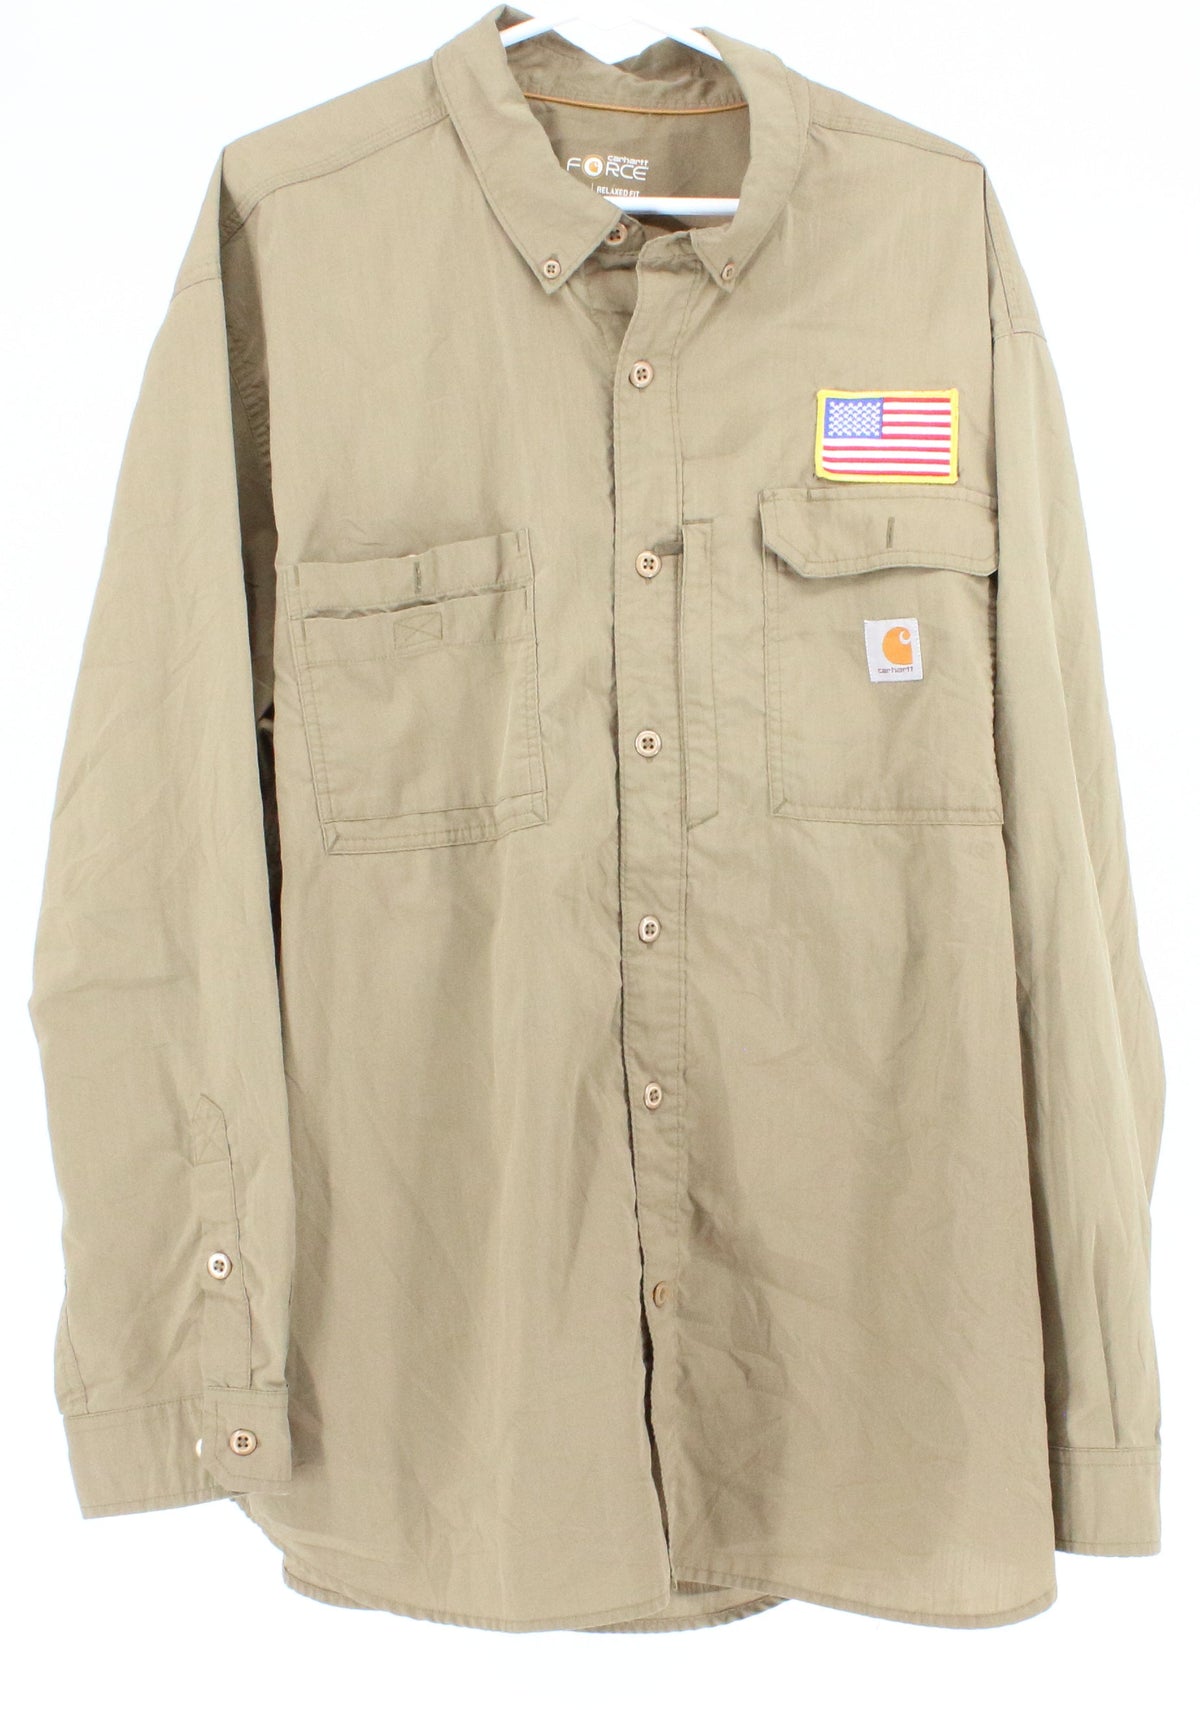 Carhartt Force Relaxed Fit USA flag Patch Brown Cargo Shirt